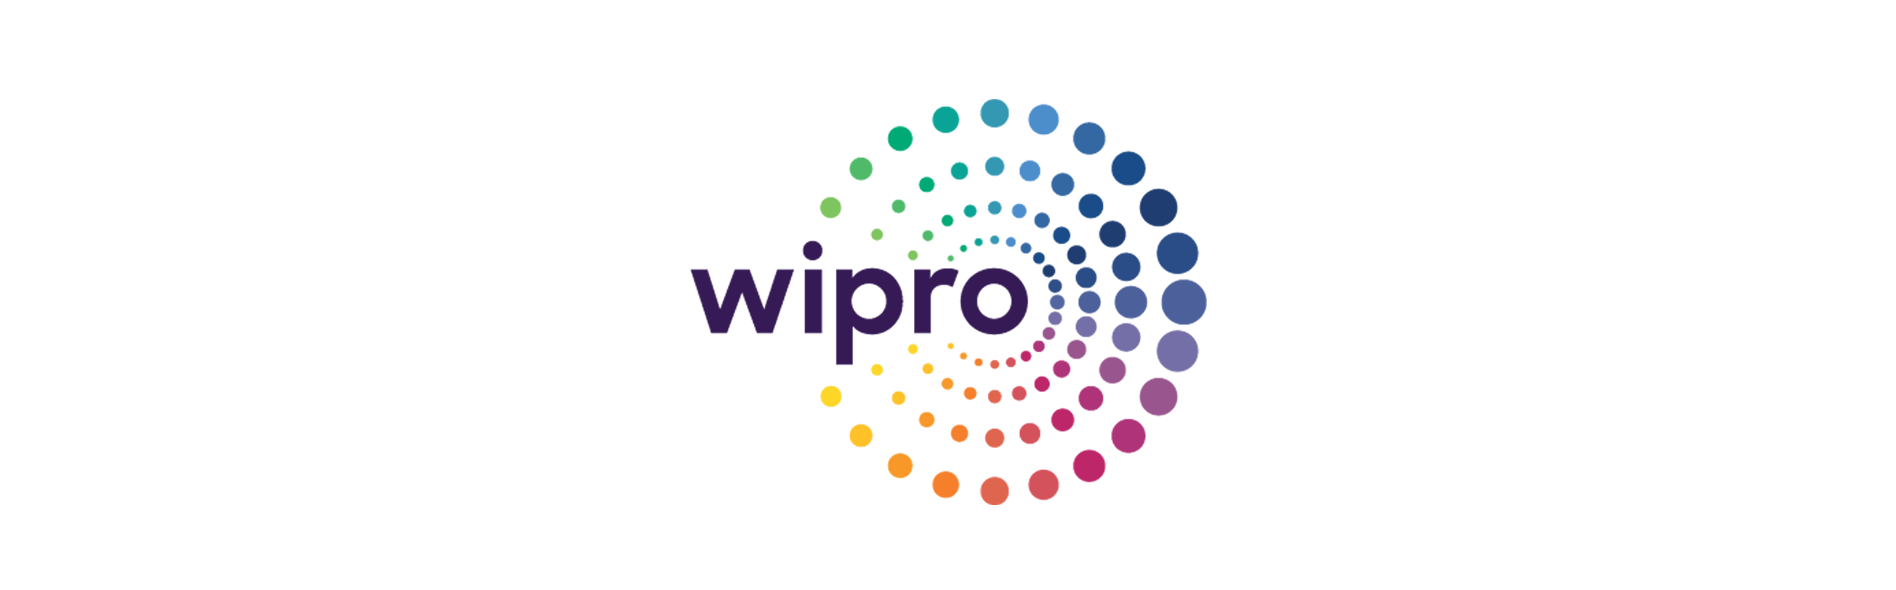 Leverage 360 Customer View for Enhanced Cross Selling - Wipro